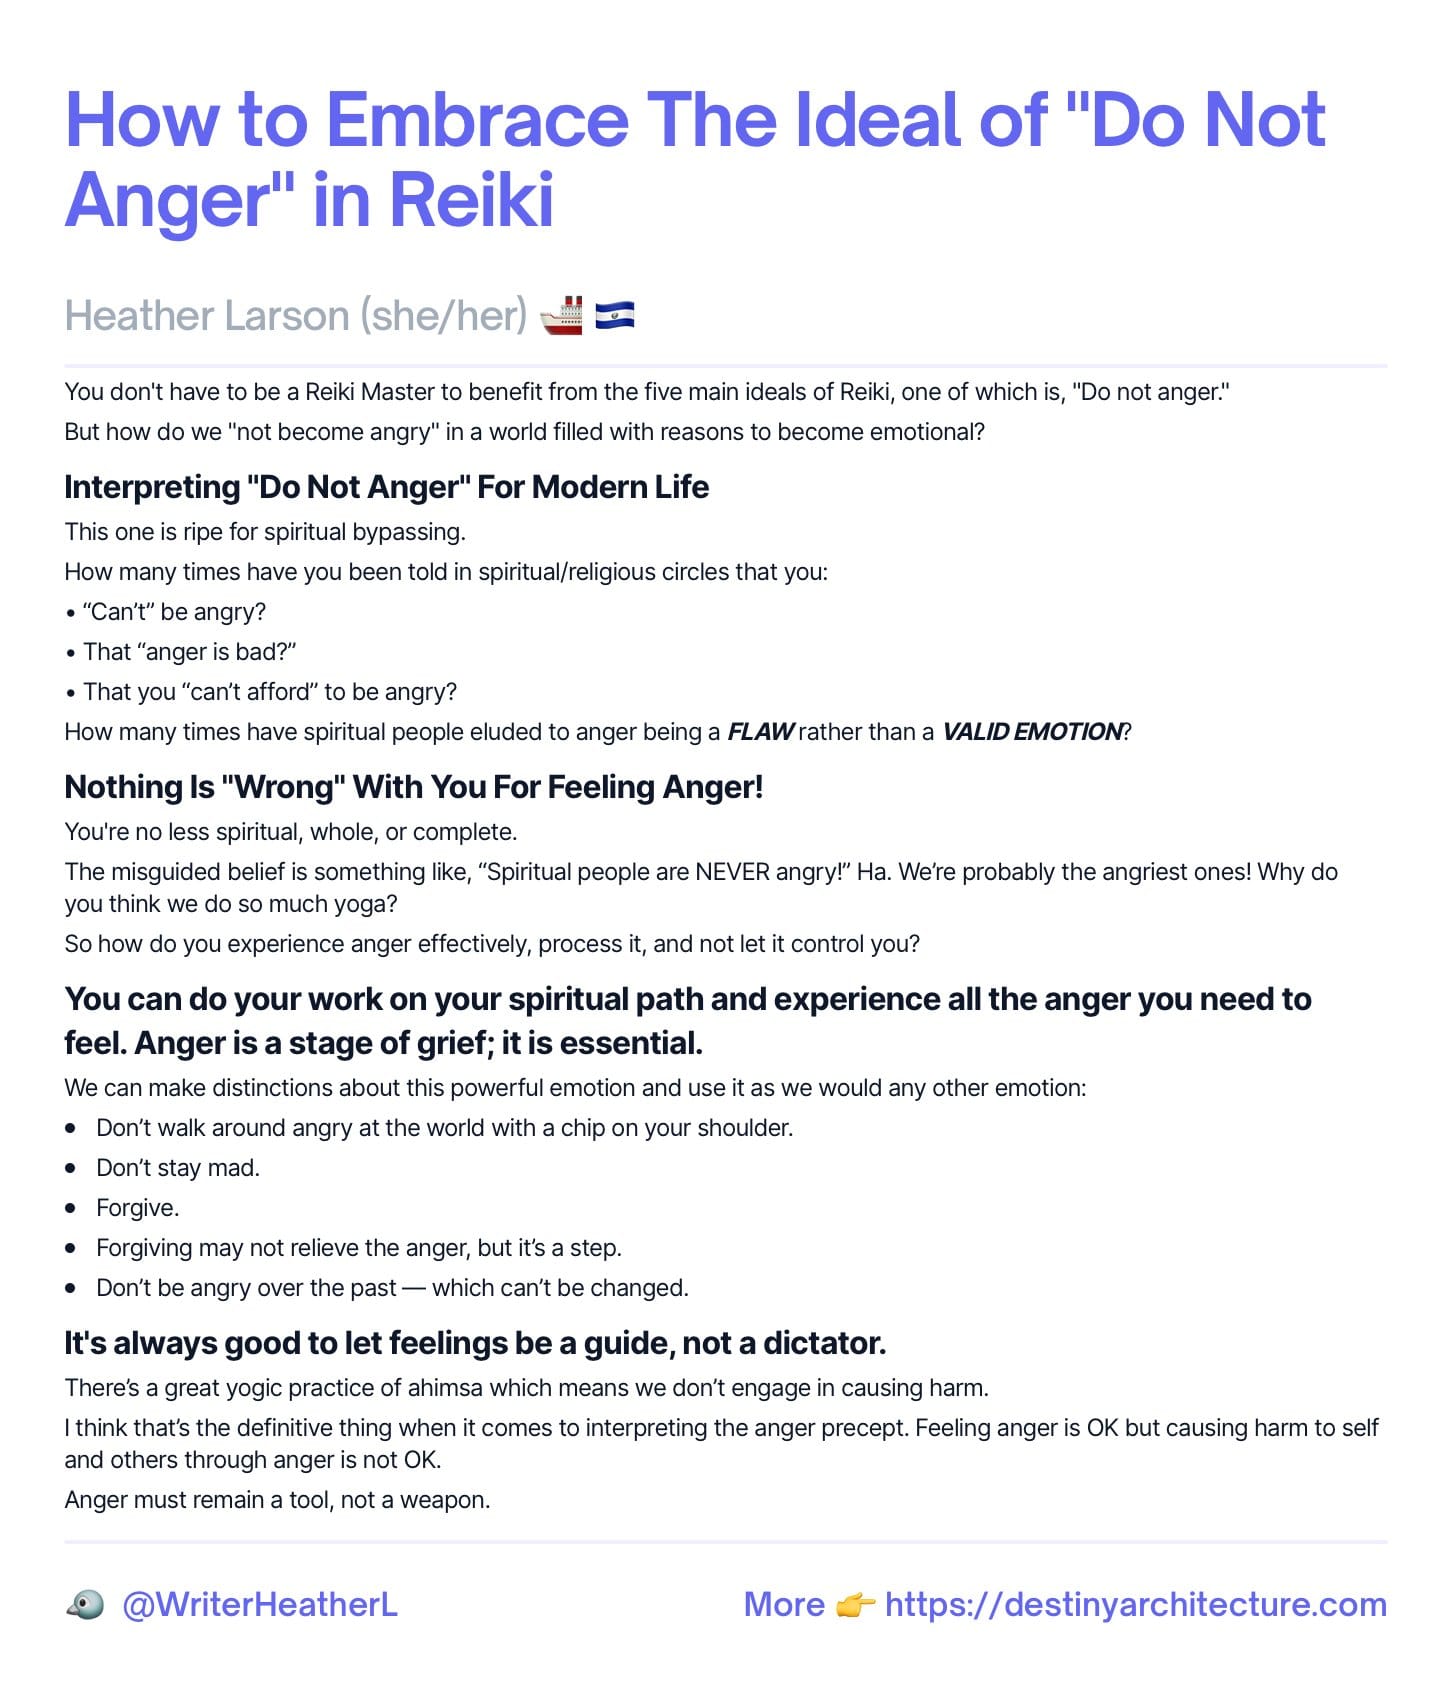 What Does the Reiki Ideal of "Do Not Anger" Really Mean in Modern Life?